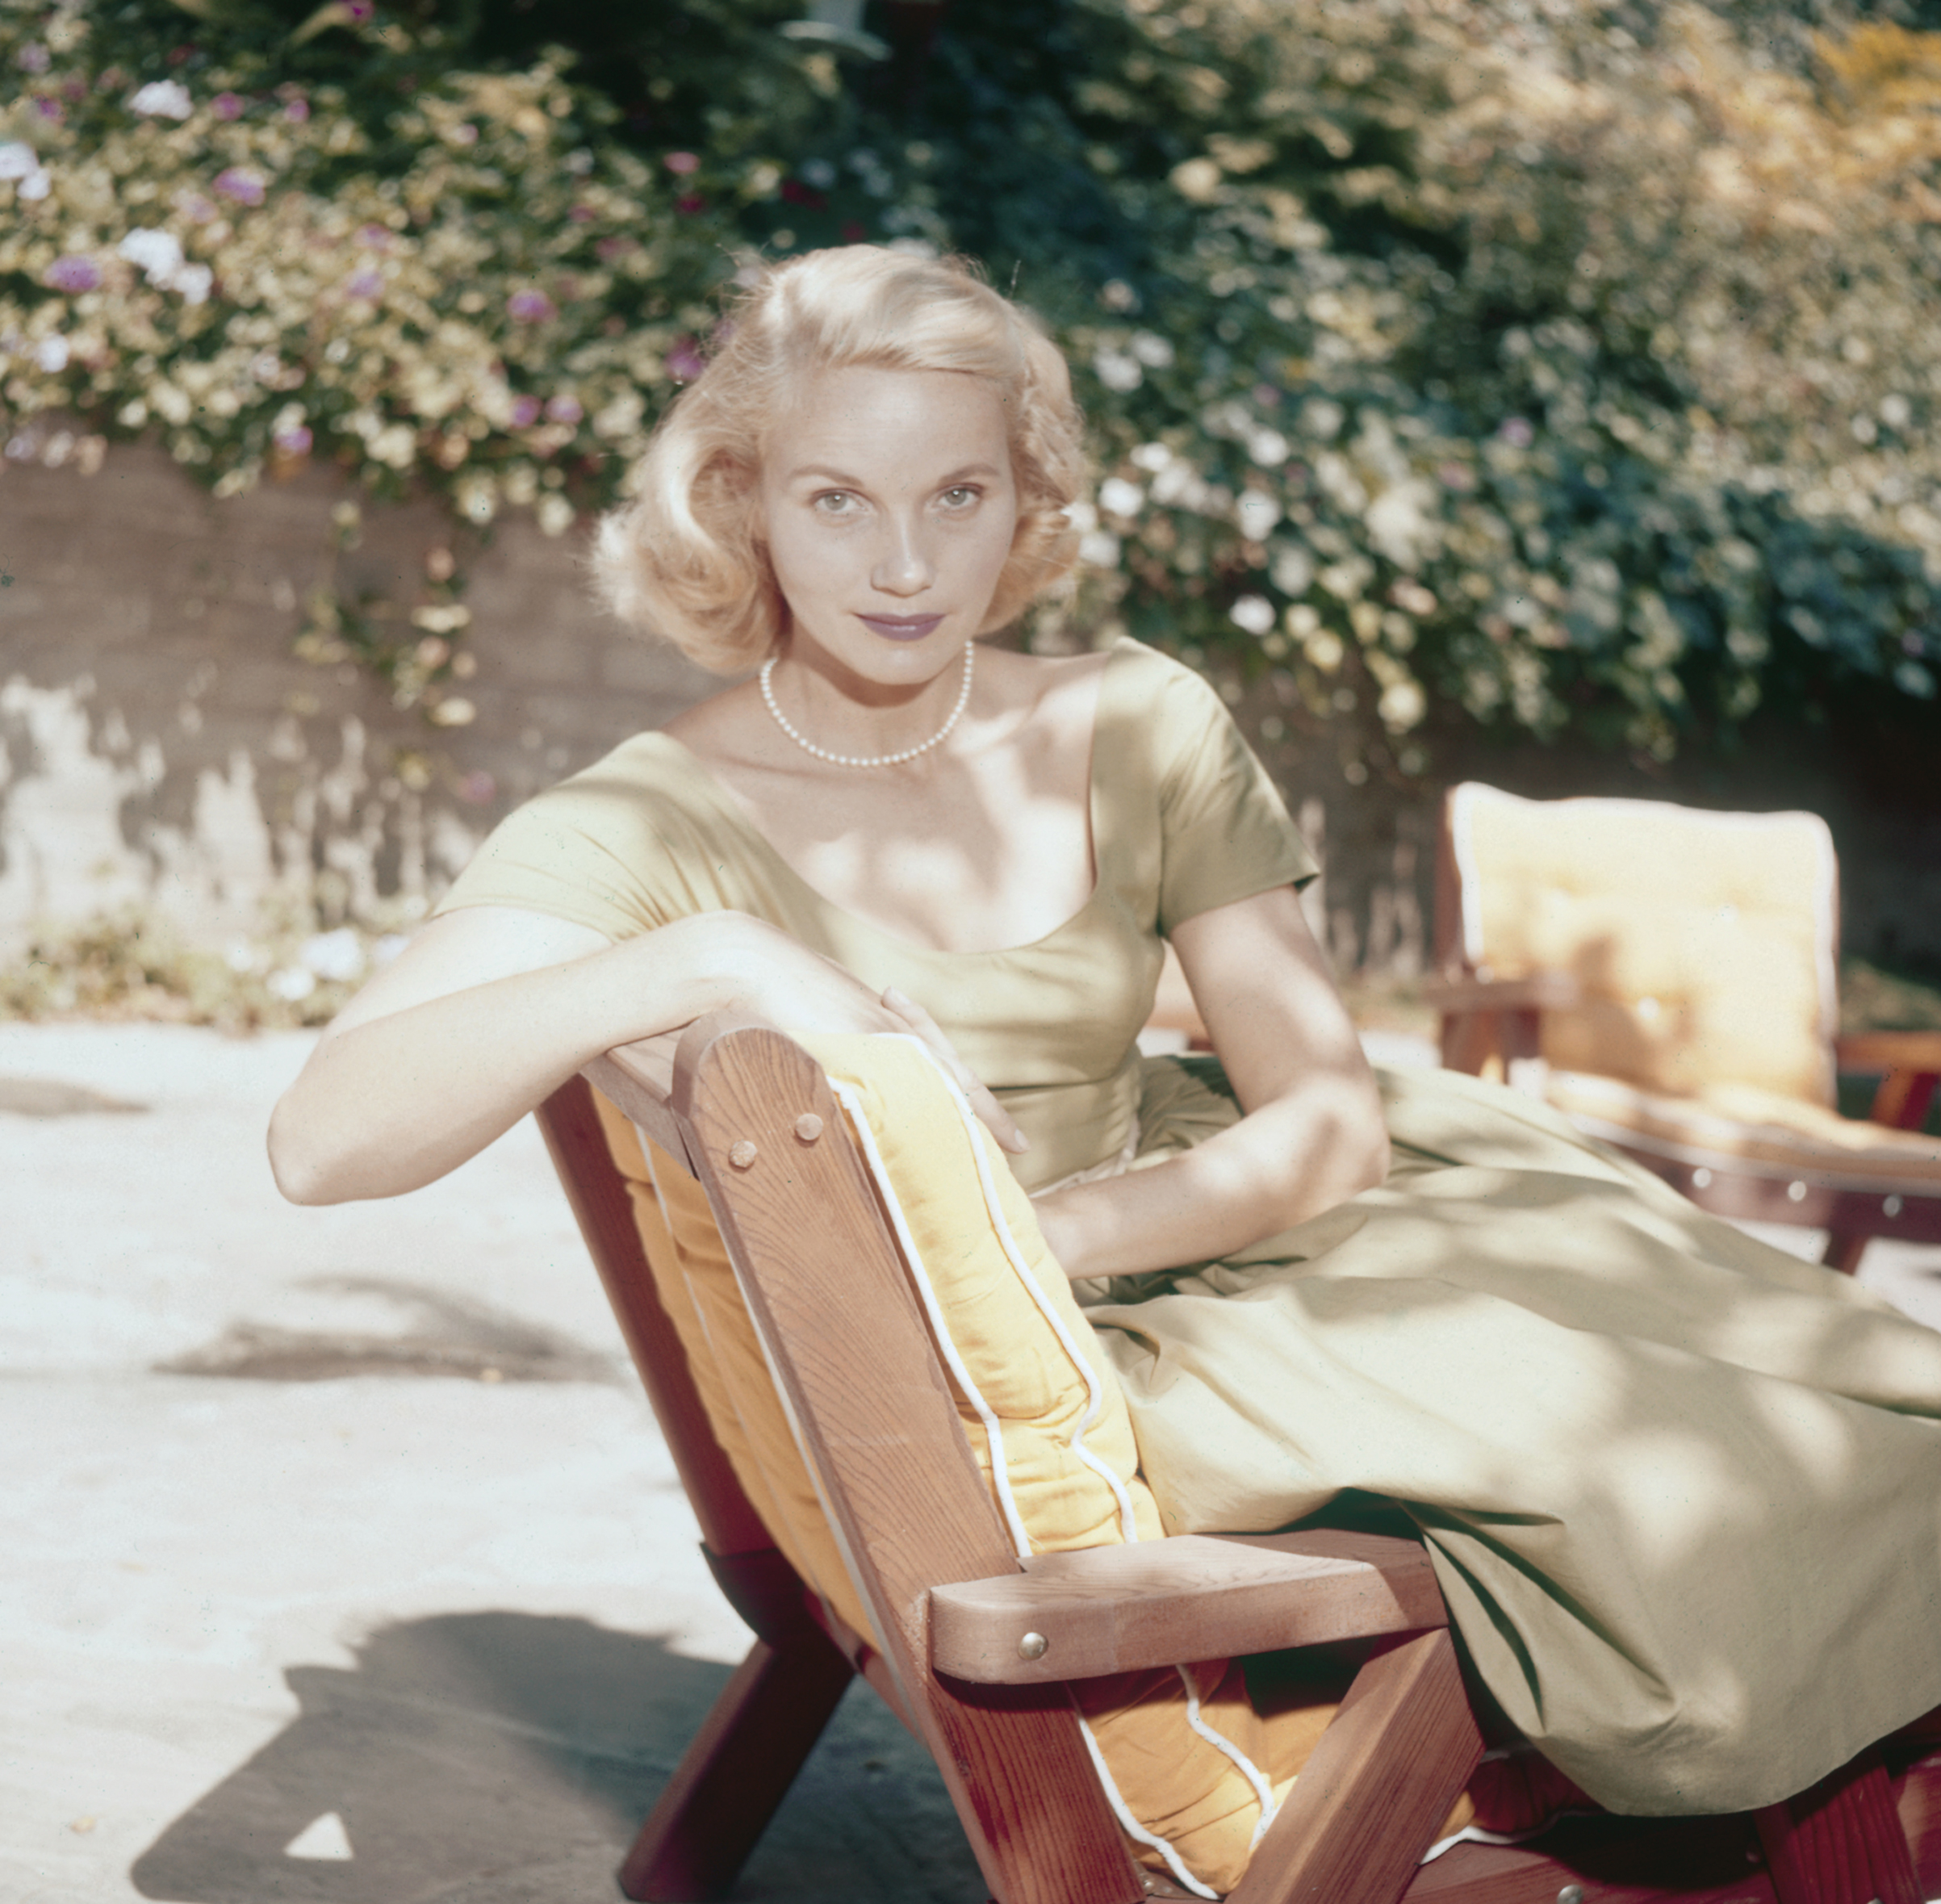 Actress Eva Marie Saint pictured seated on a sun lounger in a garden circa 1950. (Archive Photos/Getty Images)